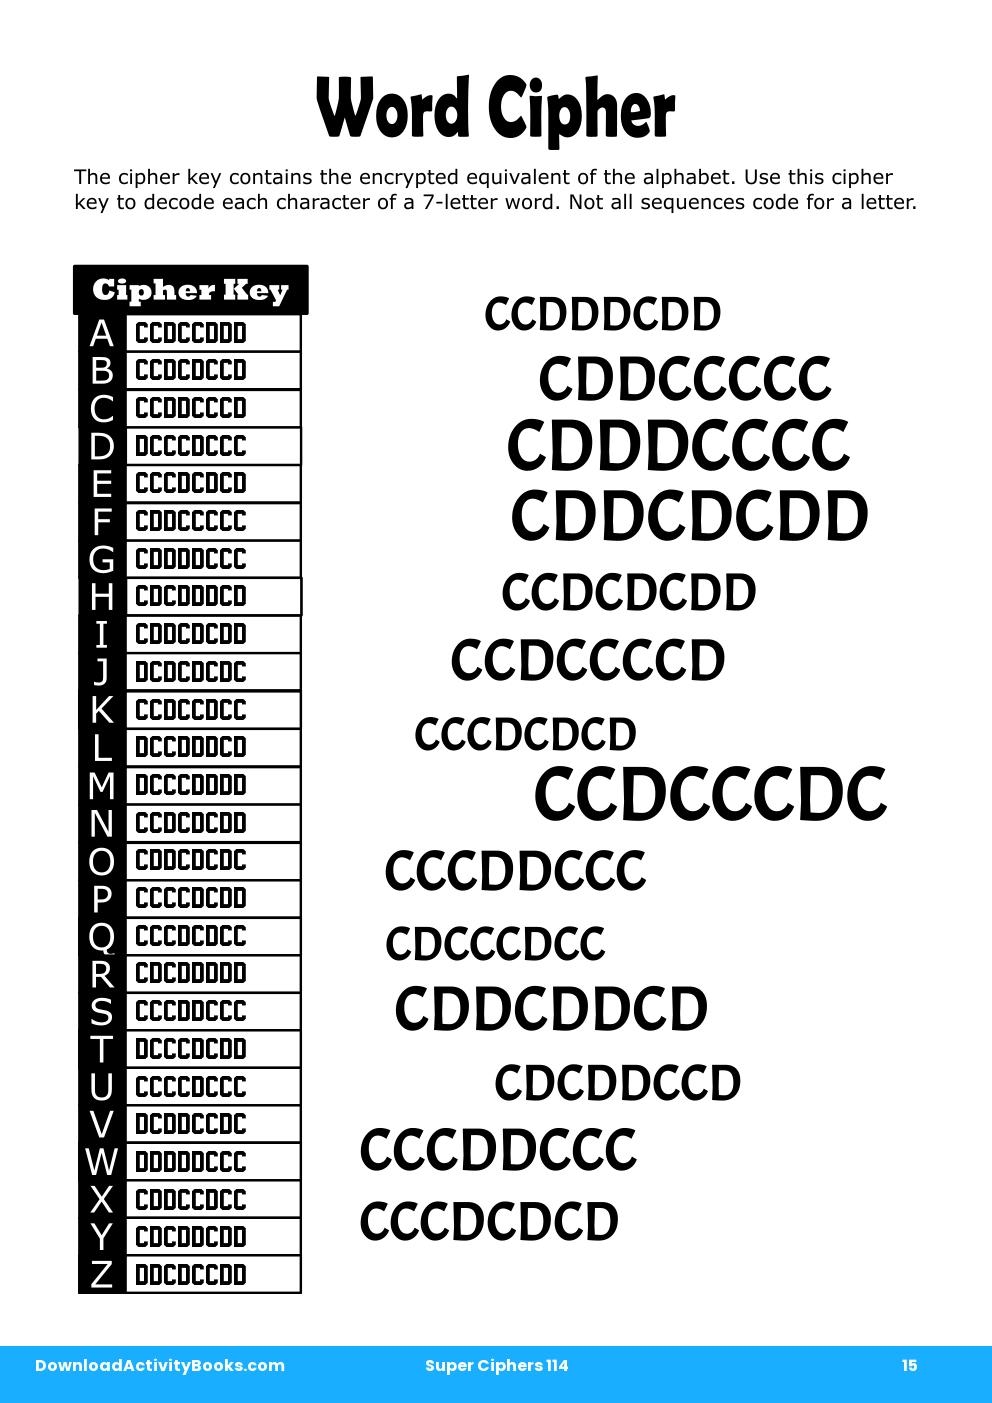 Word Cipher in Super Ciphers 114